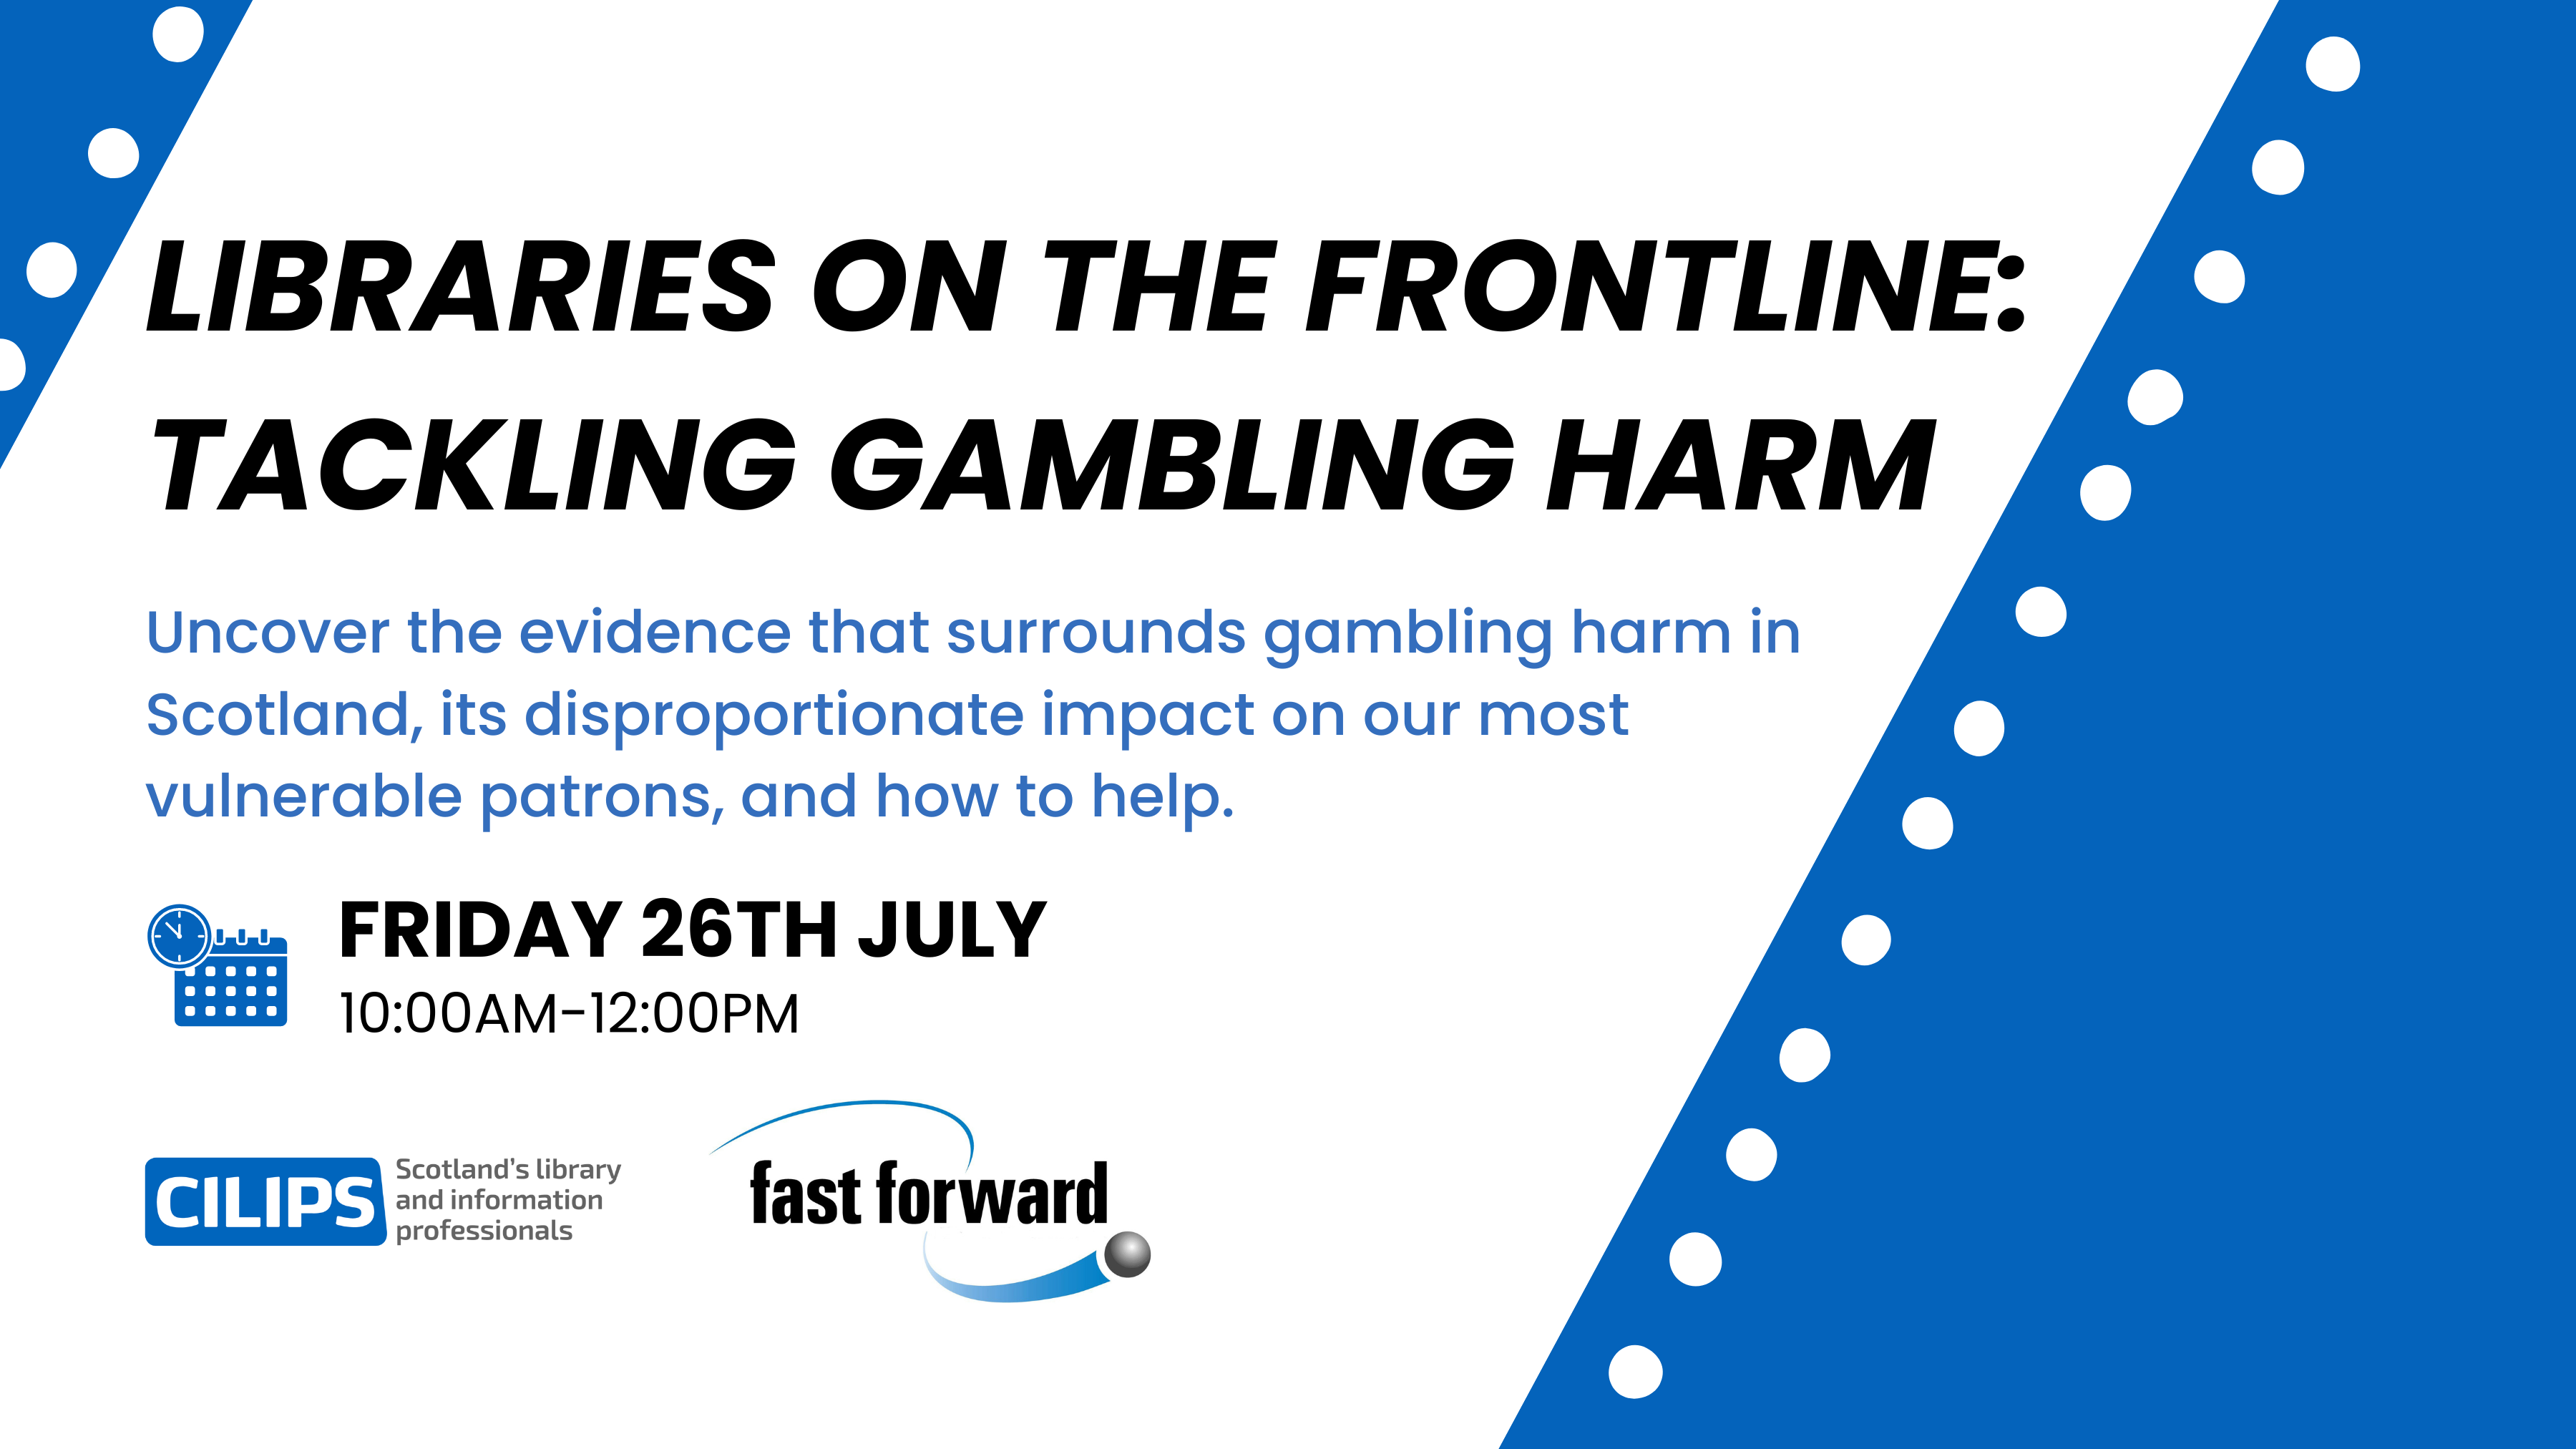 Libraries on the frontline: tackling gambling harm. Uncover the evidence that surrounds gambling harm in Scotland, its disproportionate impact on our most vulnerable patrons, and how to help. Black and blue text on a white backdrop. Friday 26th July, 10:00am-12:00pm. CILIPS blue logo and Fast Forward new logo.